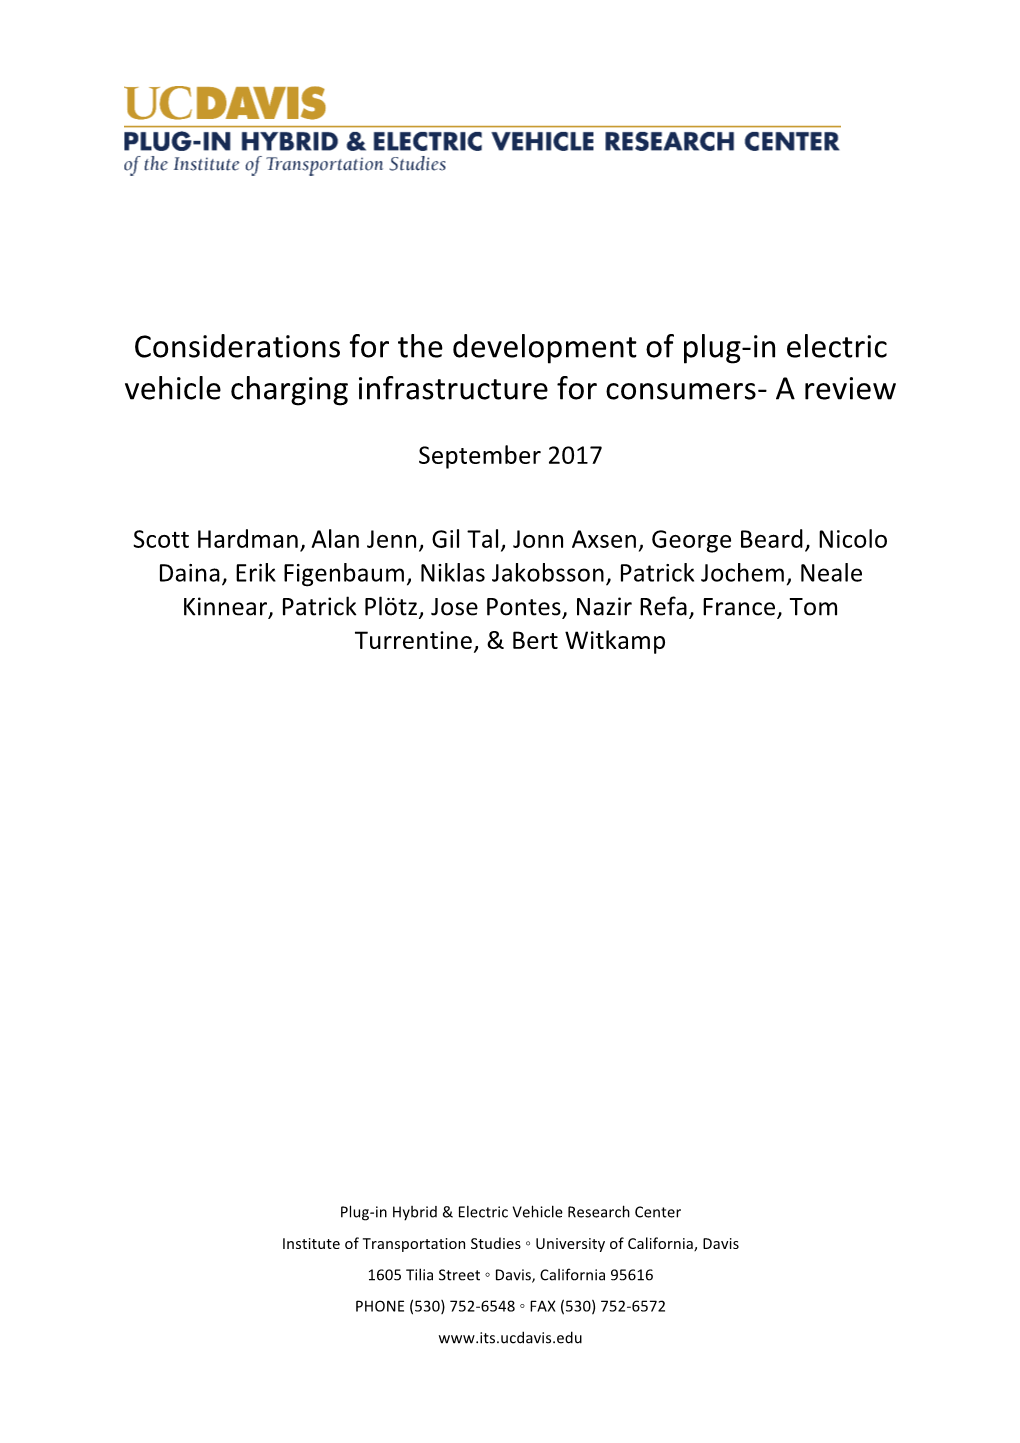 Considerations for the Development of Plug-In Electric Vehicle Charging Infrastructure for Consumers- a Review